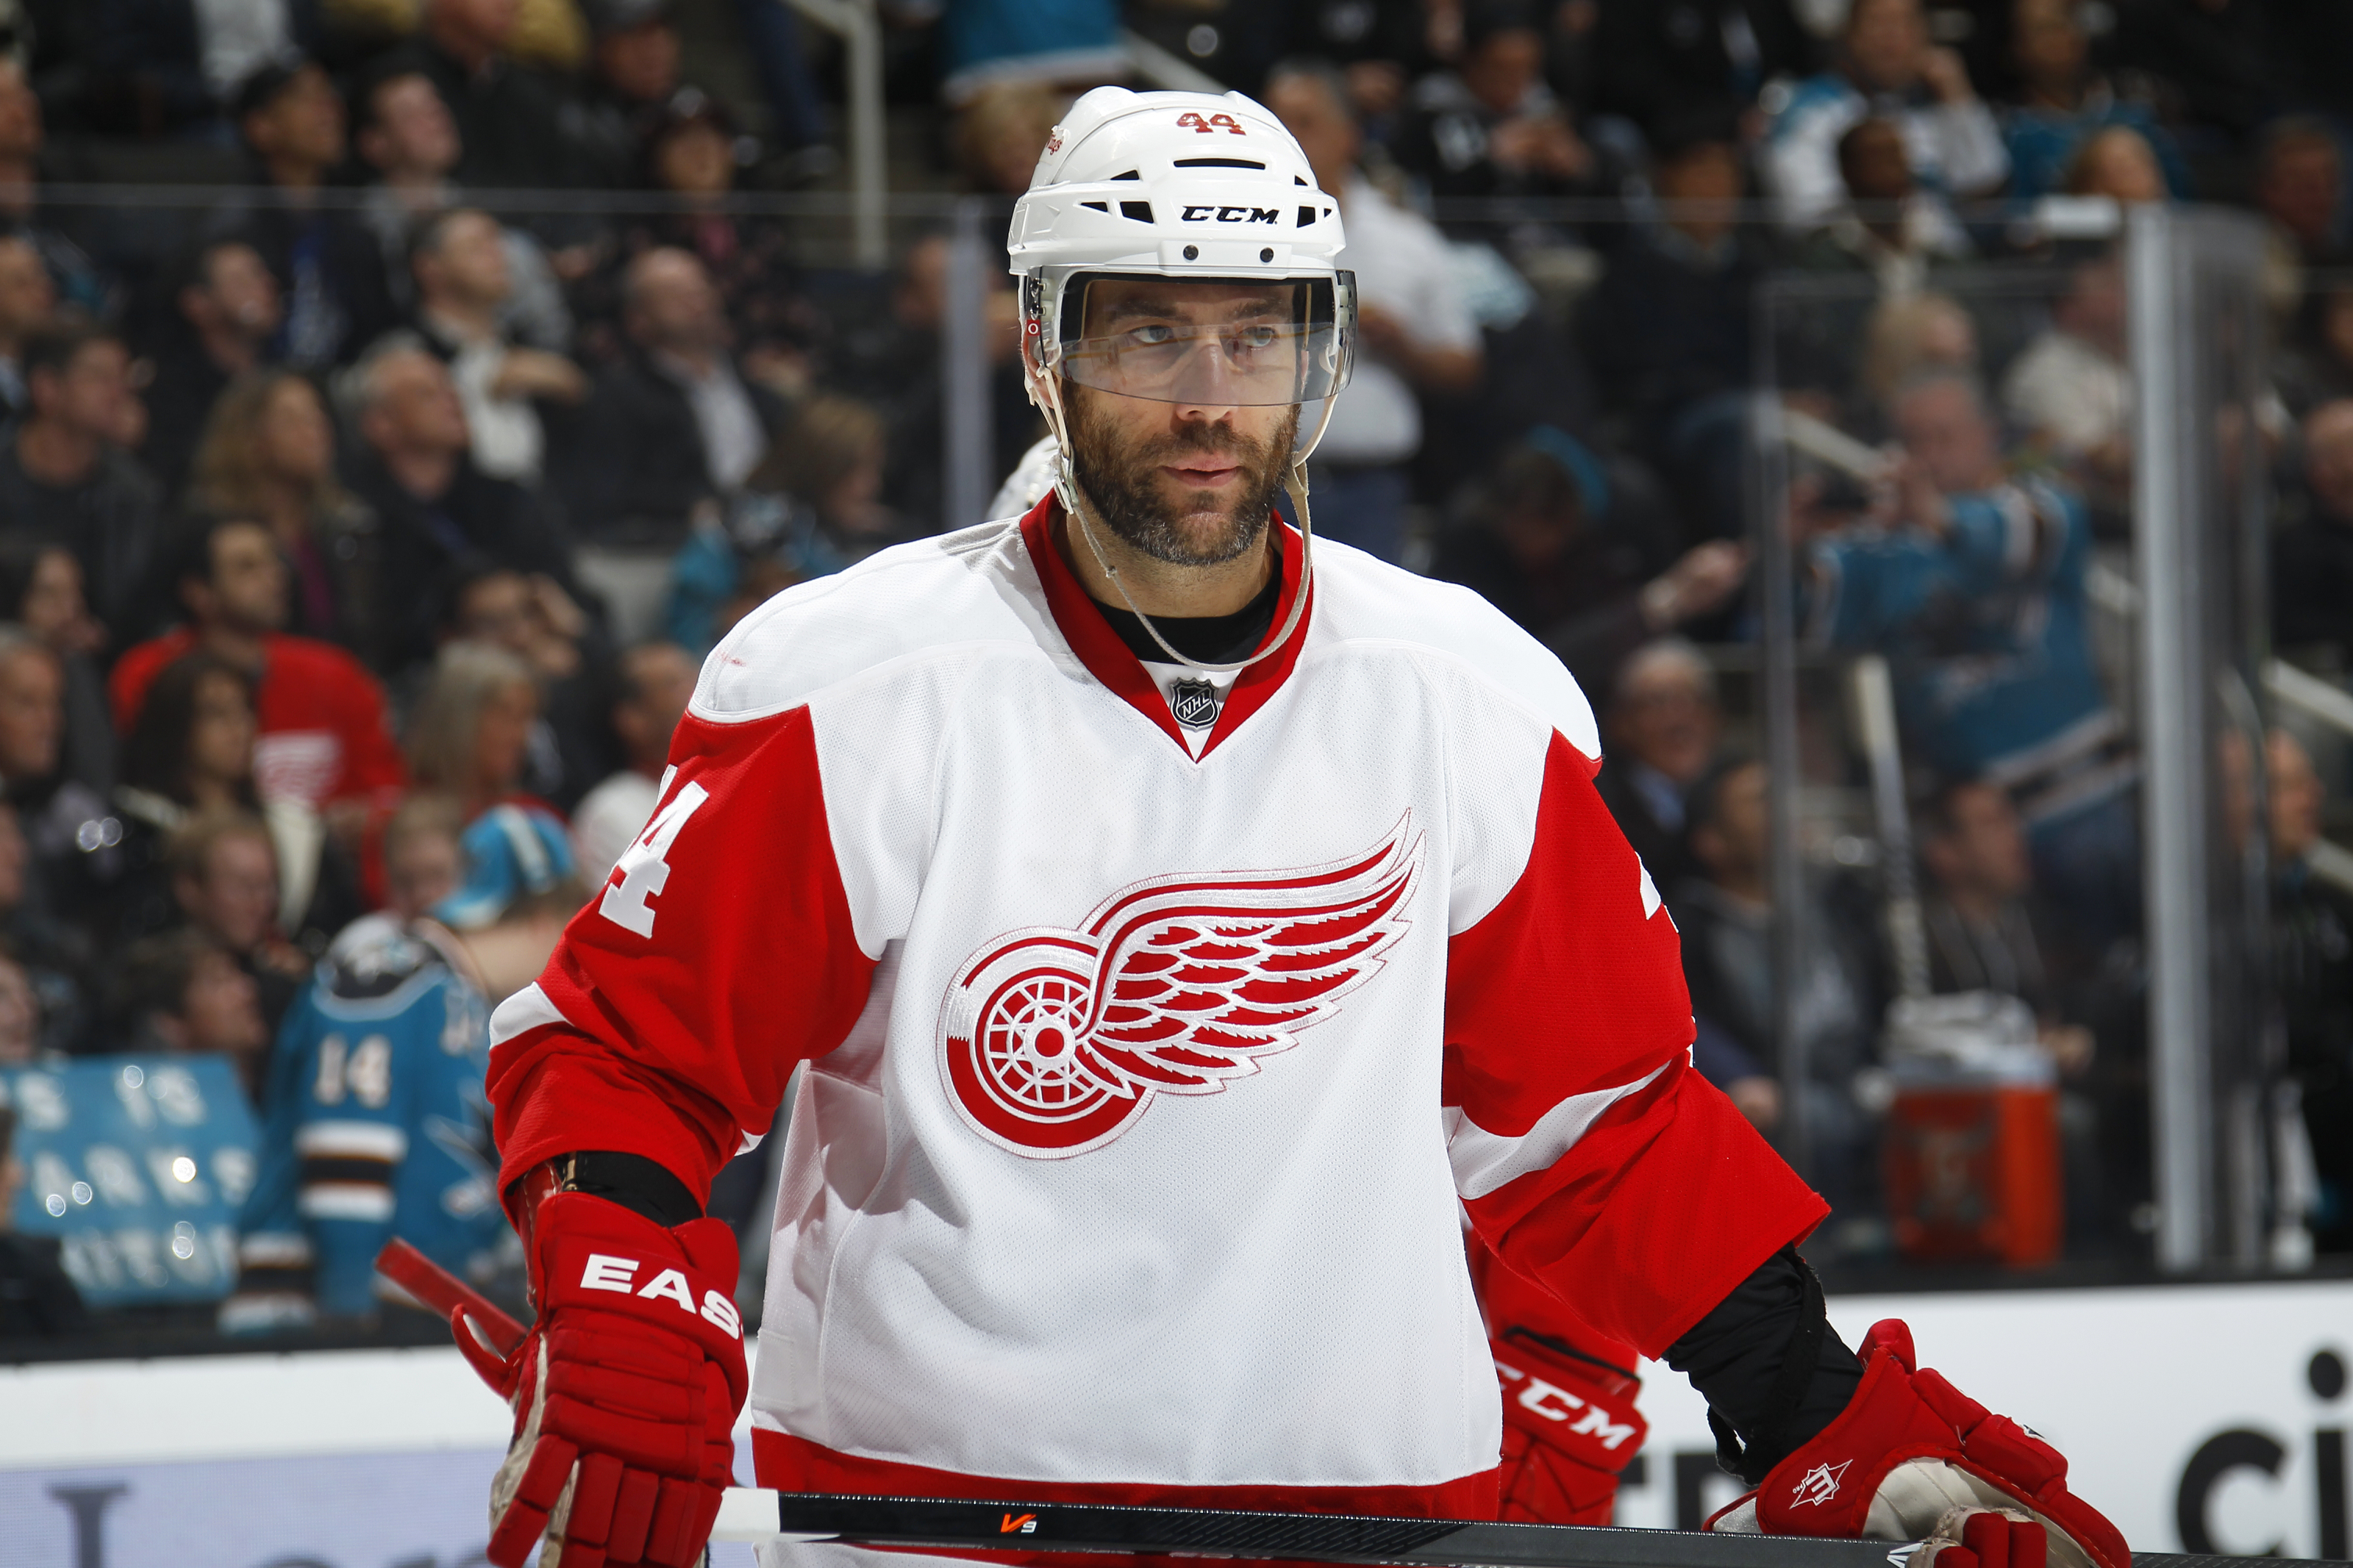 Shipped up to Boston: Red Wings trade Bertuzzi to Bruins